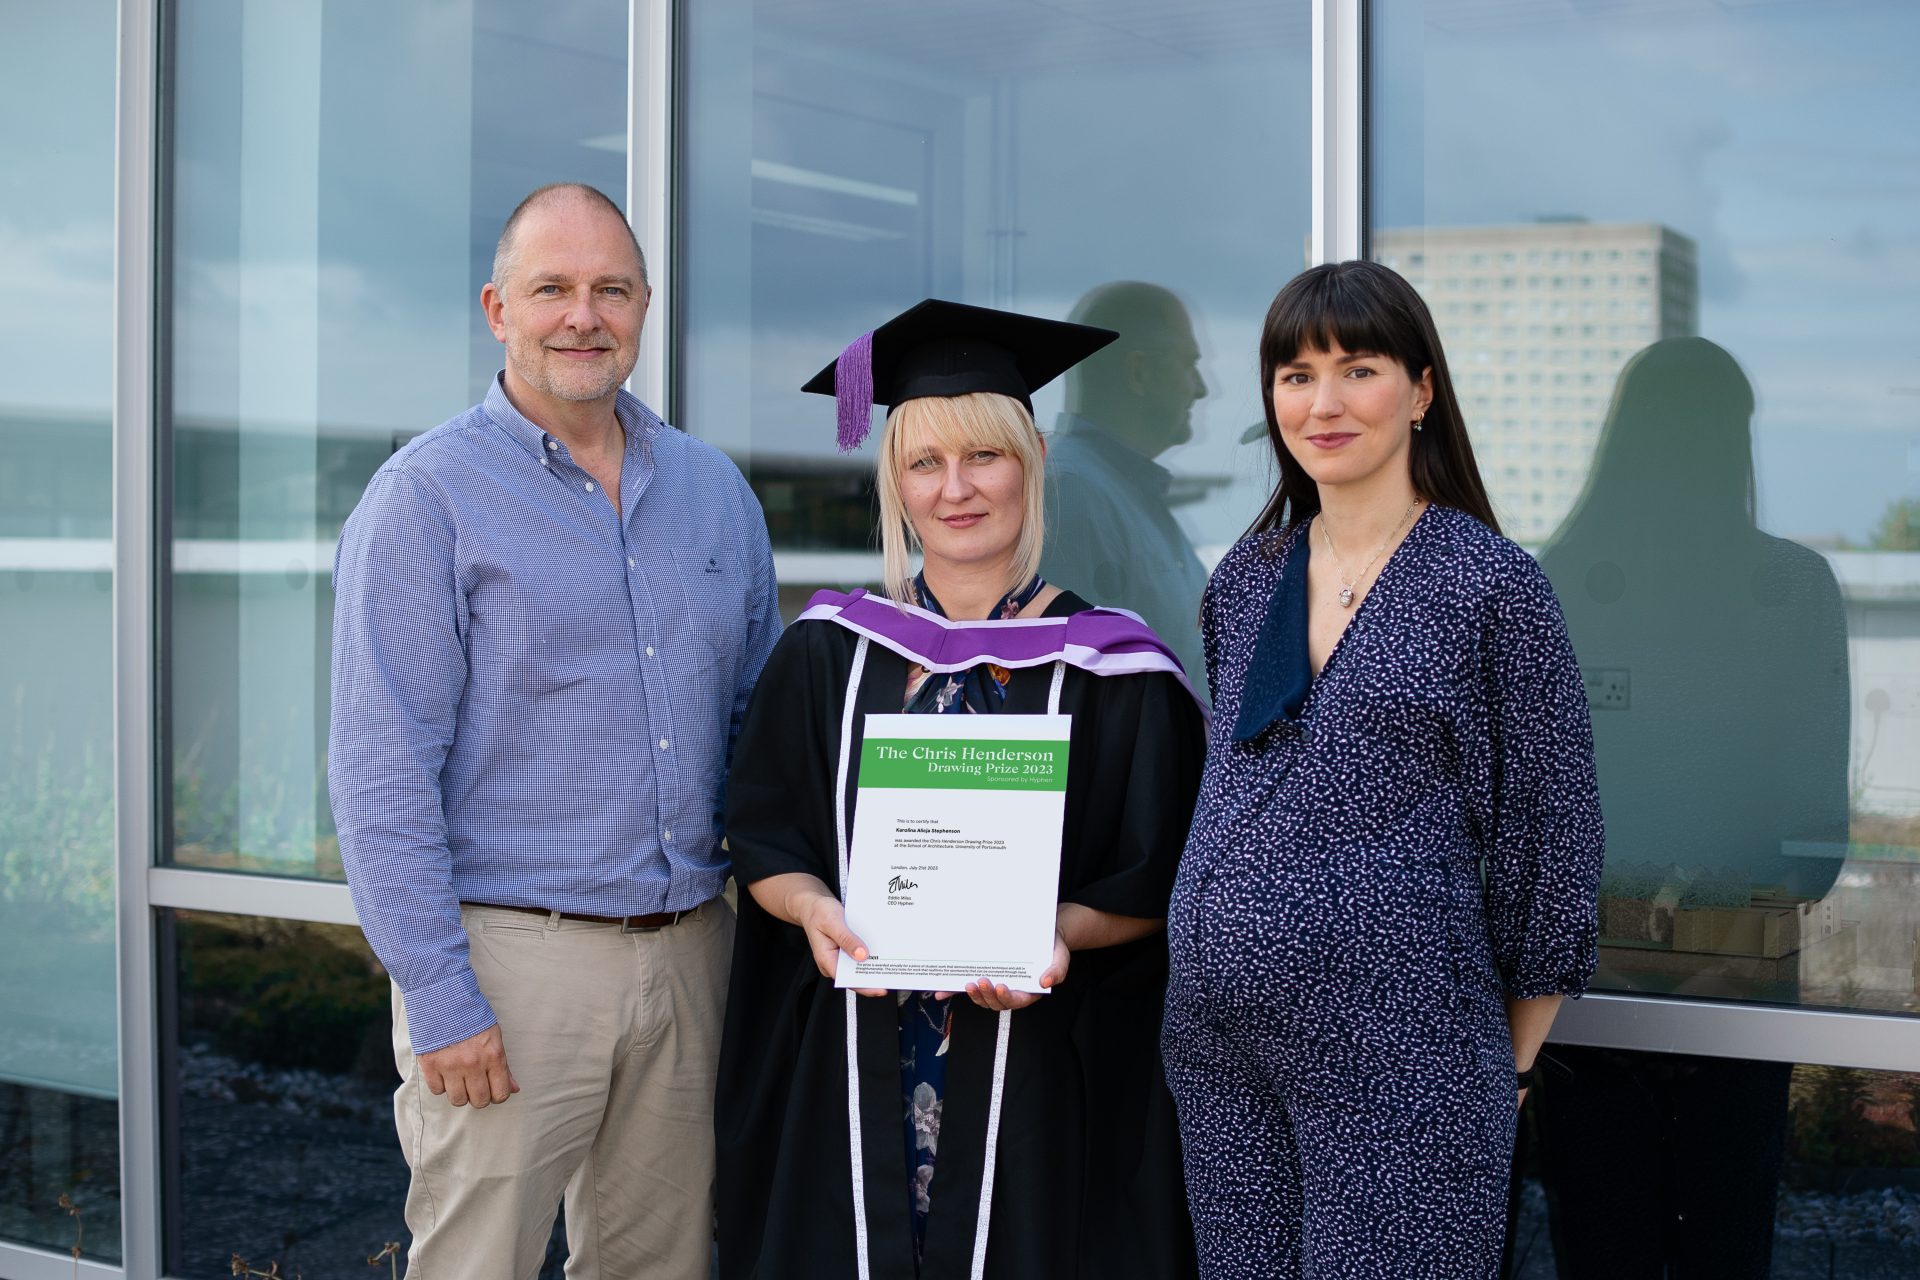 Hyphen Drawing Prize presented at University of Portsmouth awards ceremony